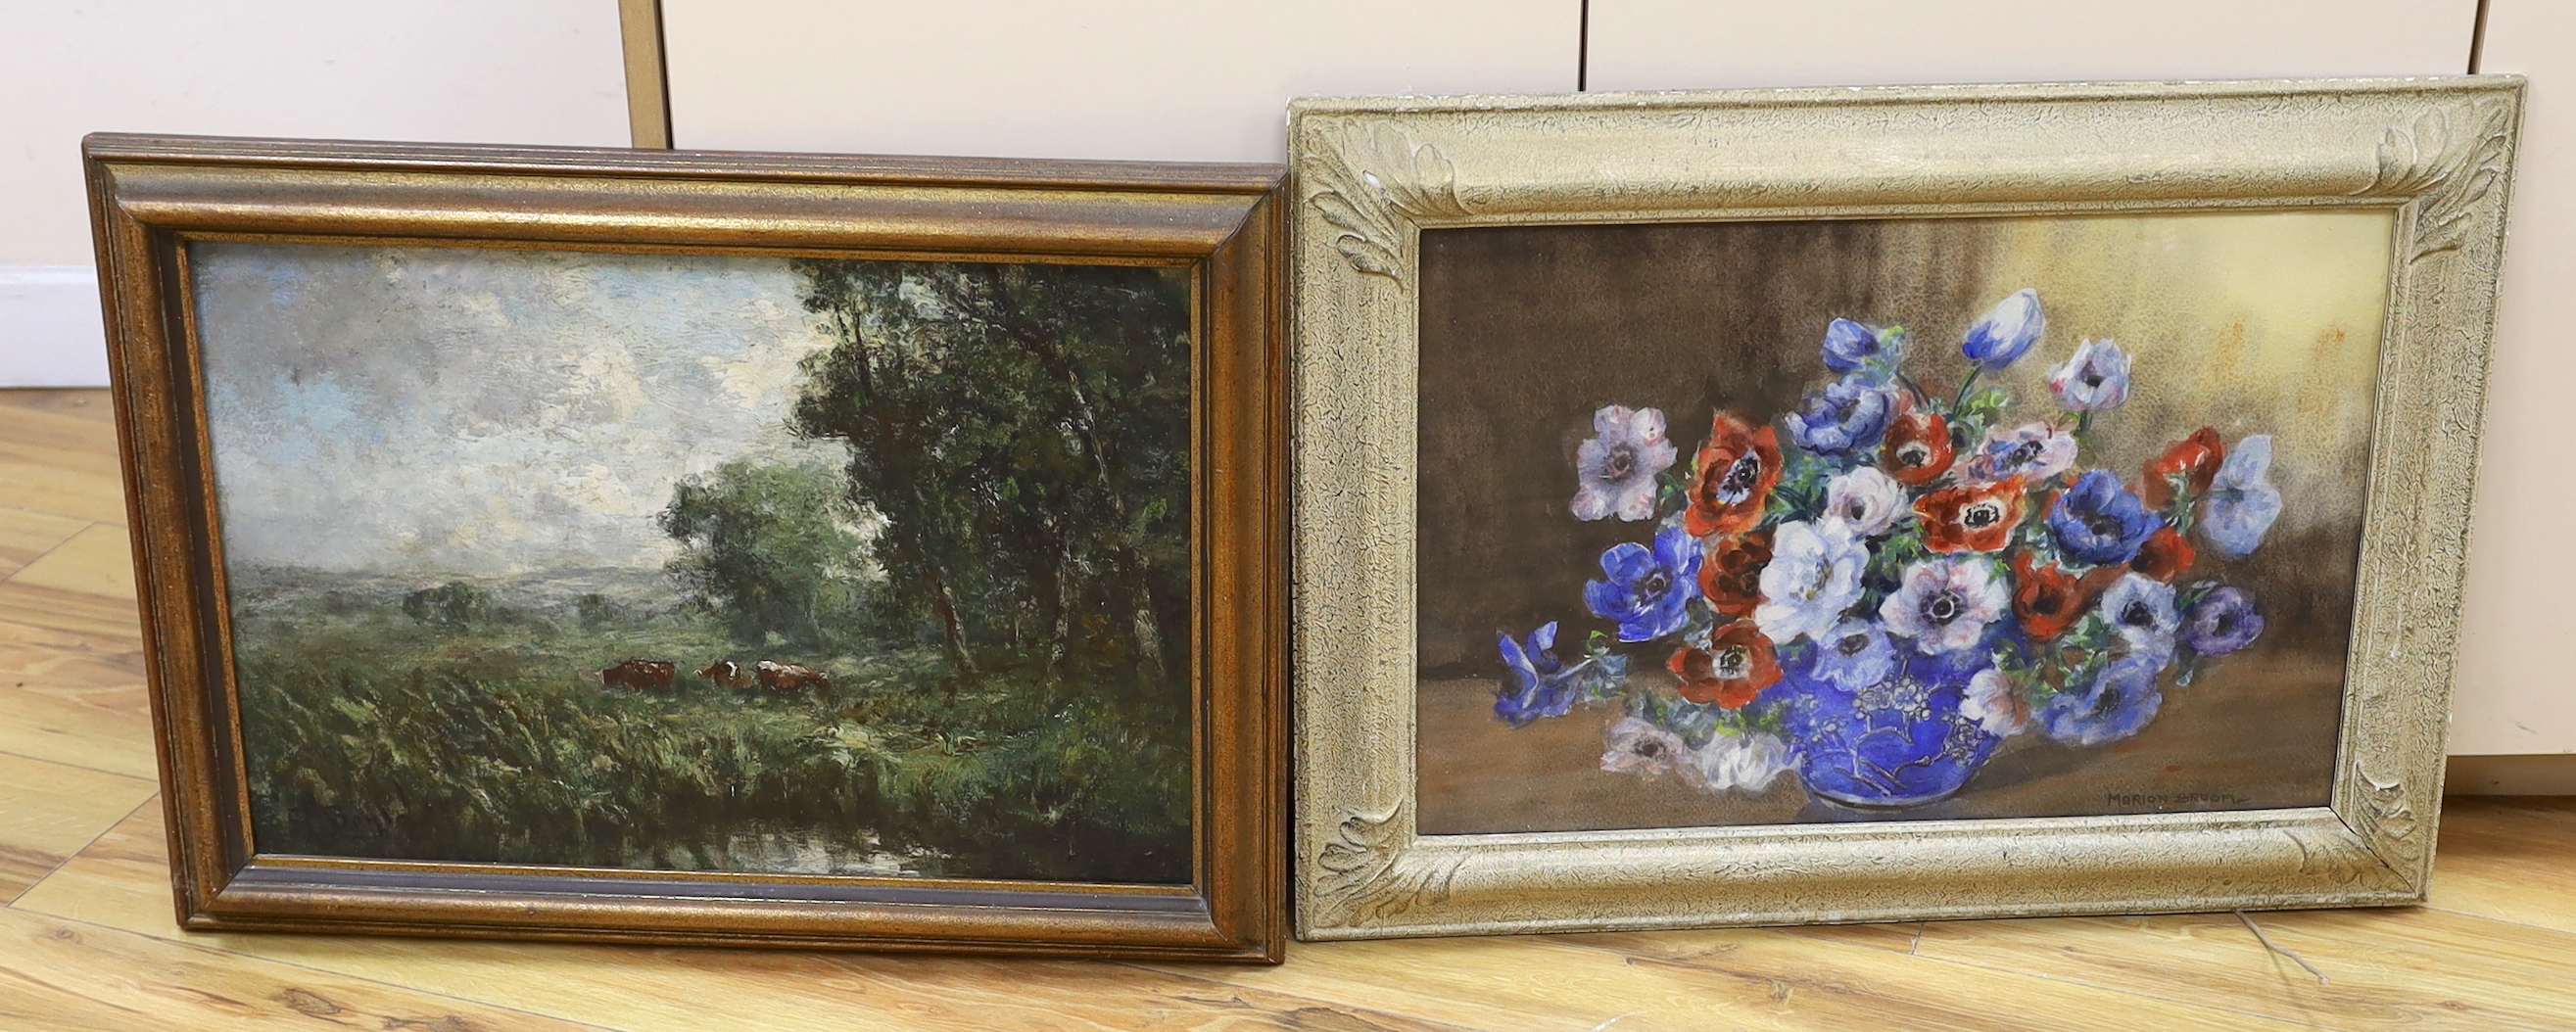 Marion L. Broom (1878-1962) watercolour, Still life of flowers in a jar, signed, together with an oil on canvas in the style of George Boyle, Cattle in a landscape, unsigned, largest 55 x 37cm